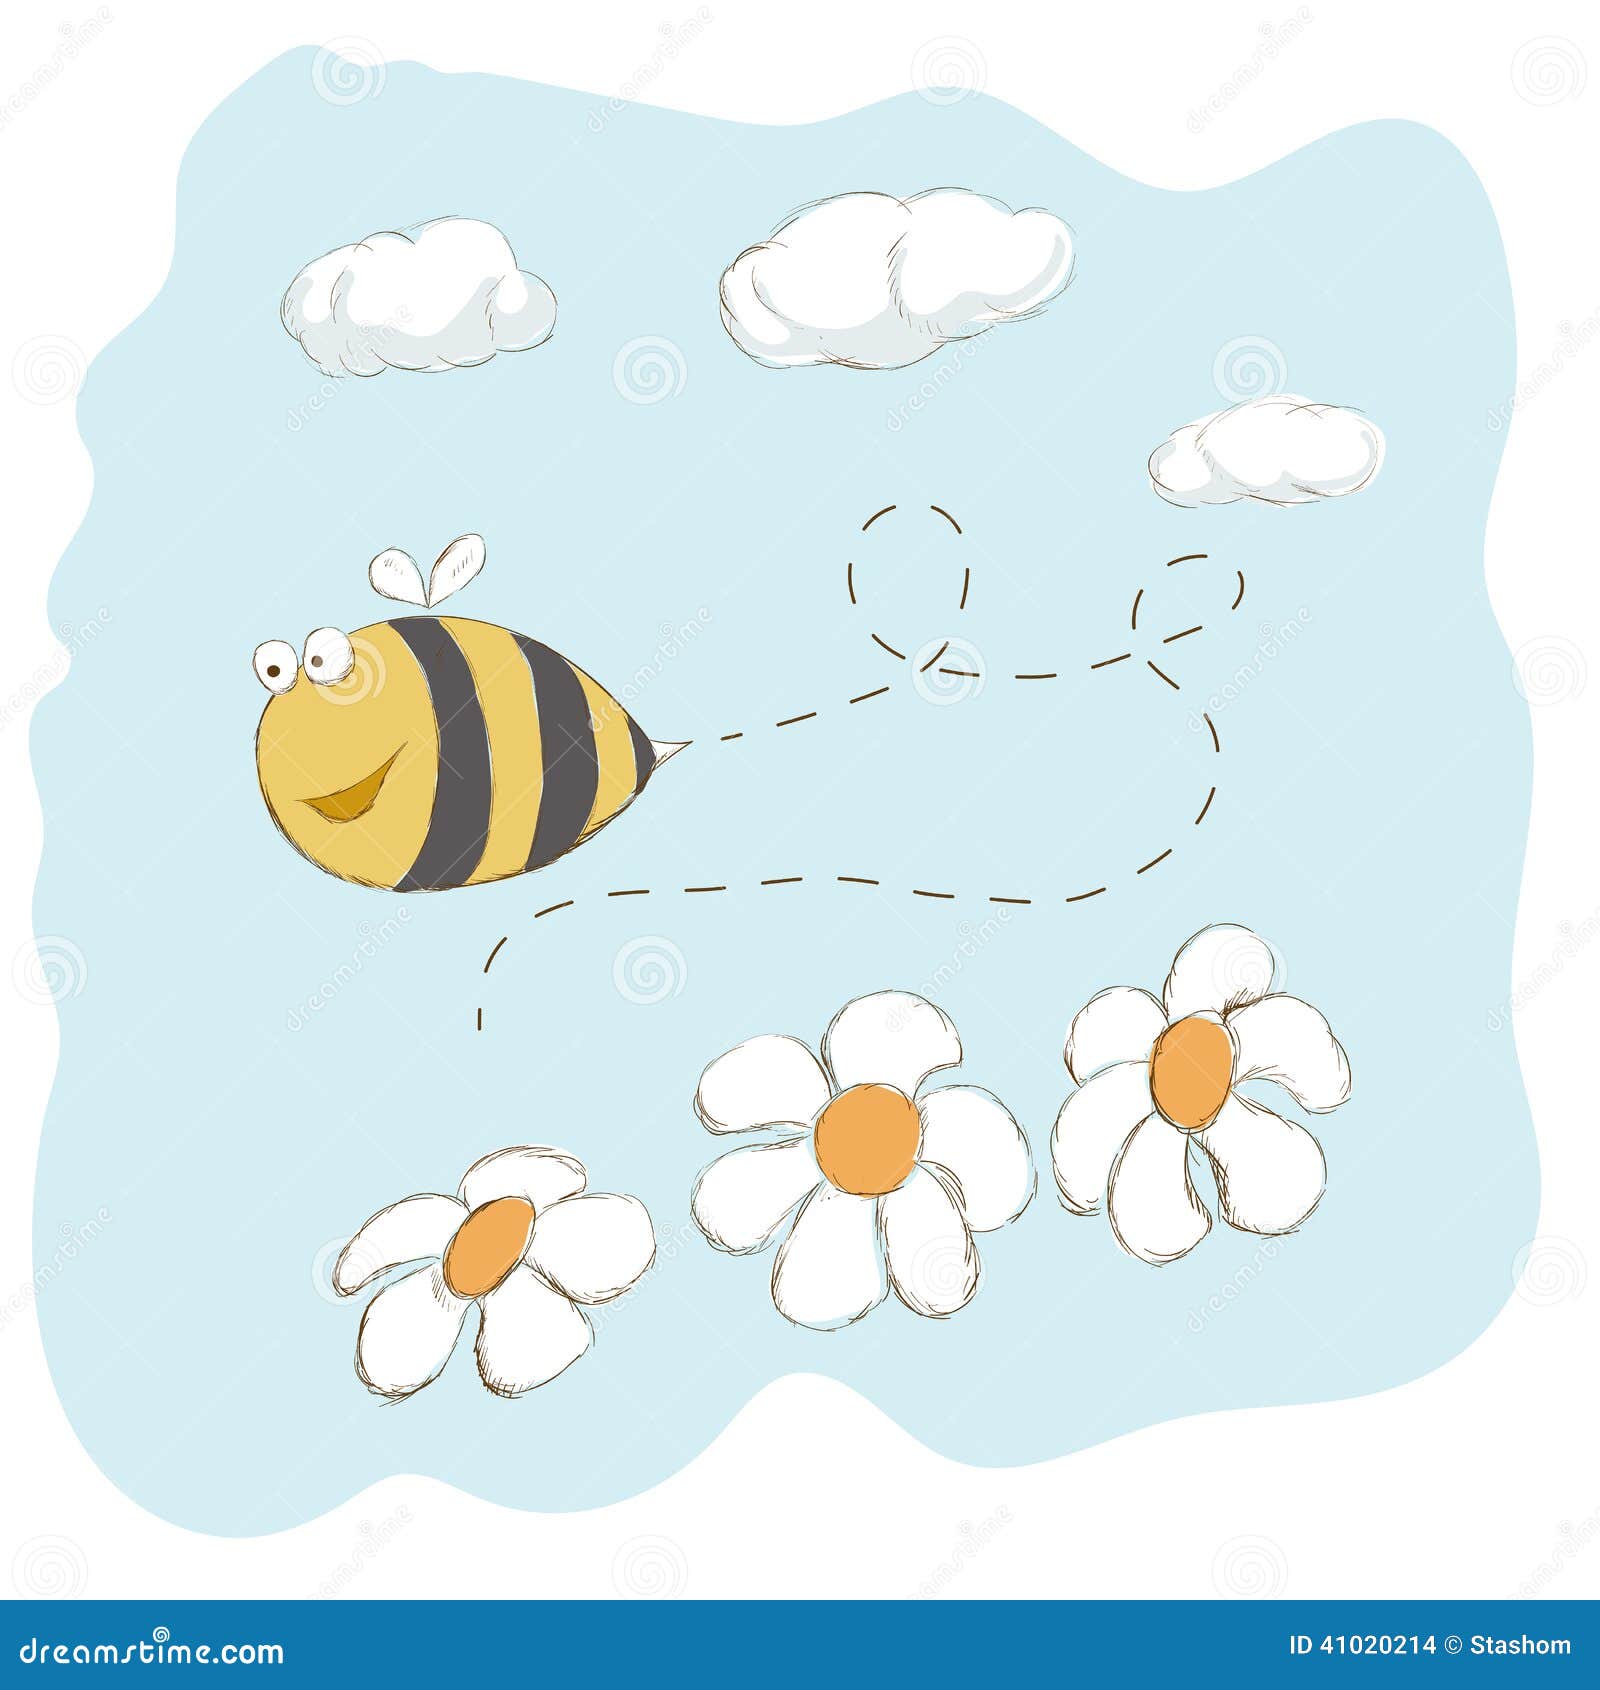 Cute bee flying around flowers. Vector illustration, EPS10.